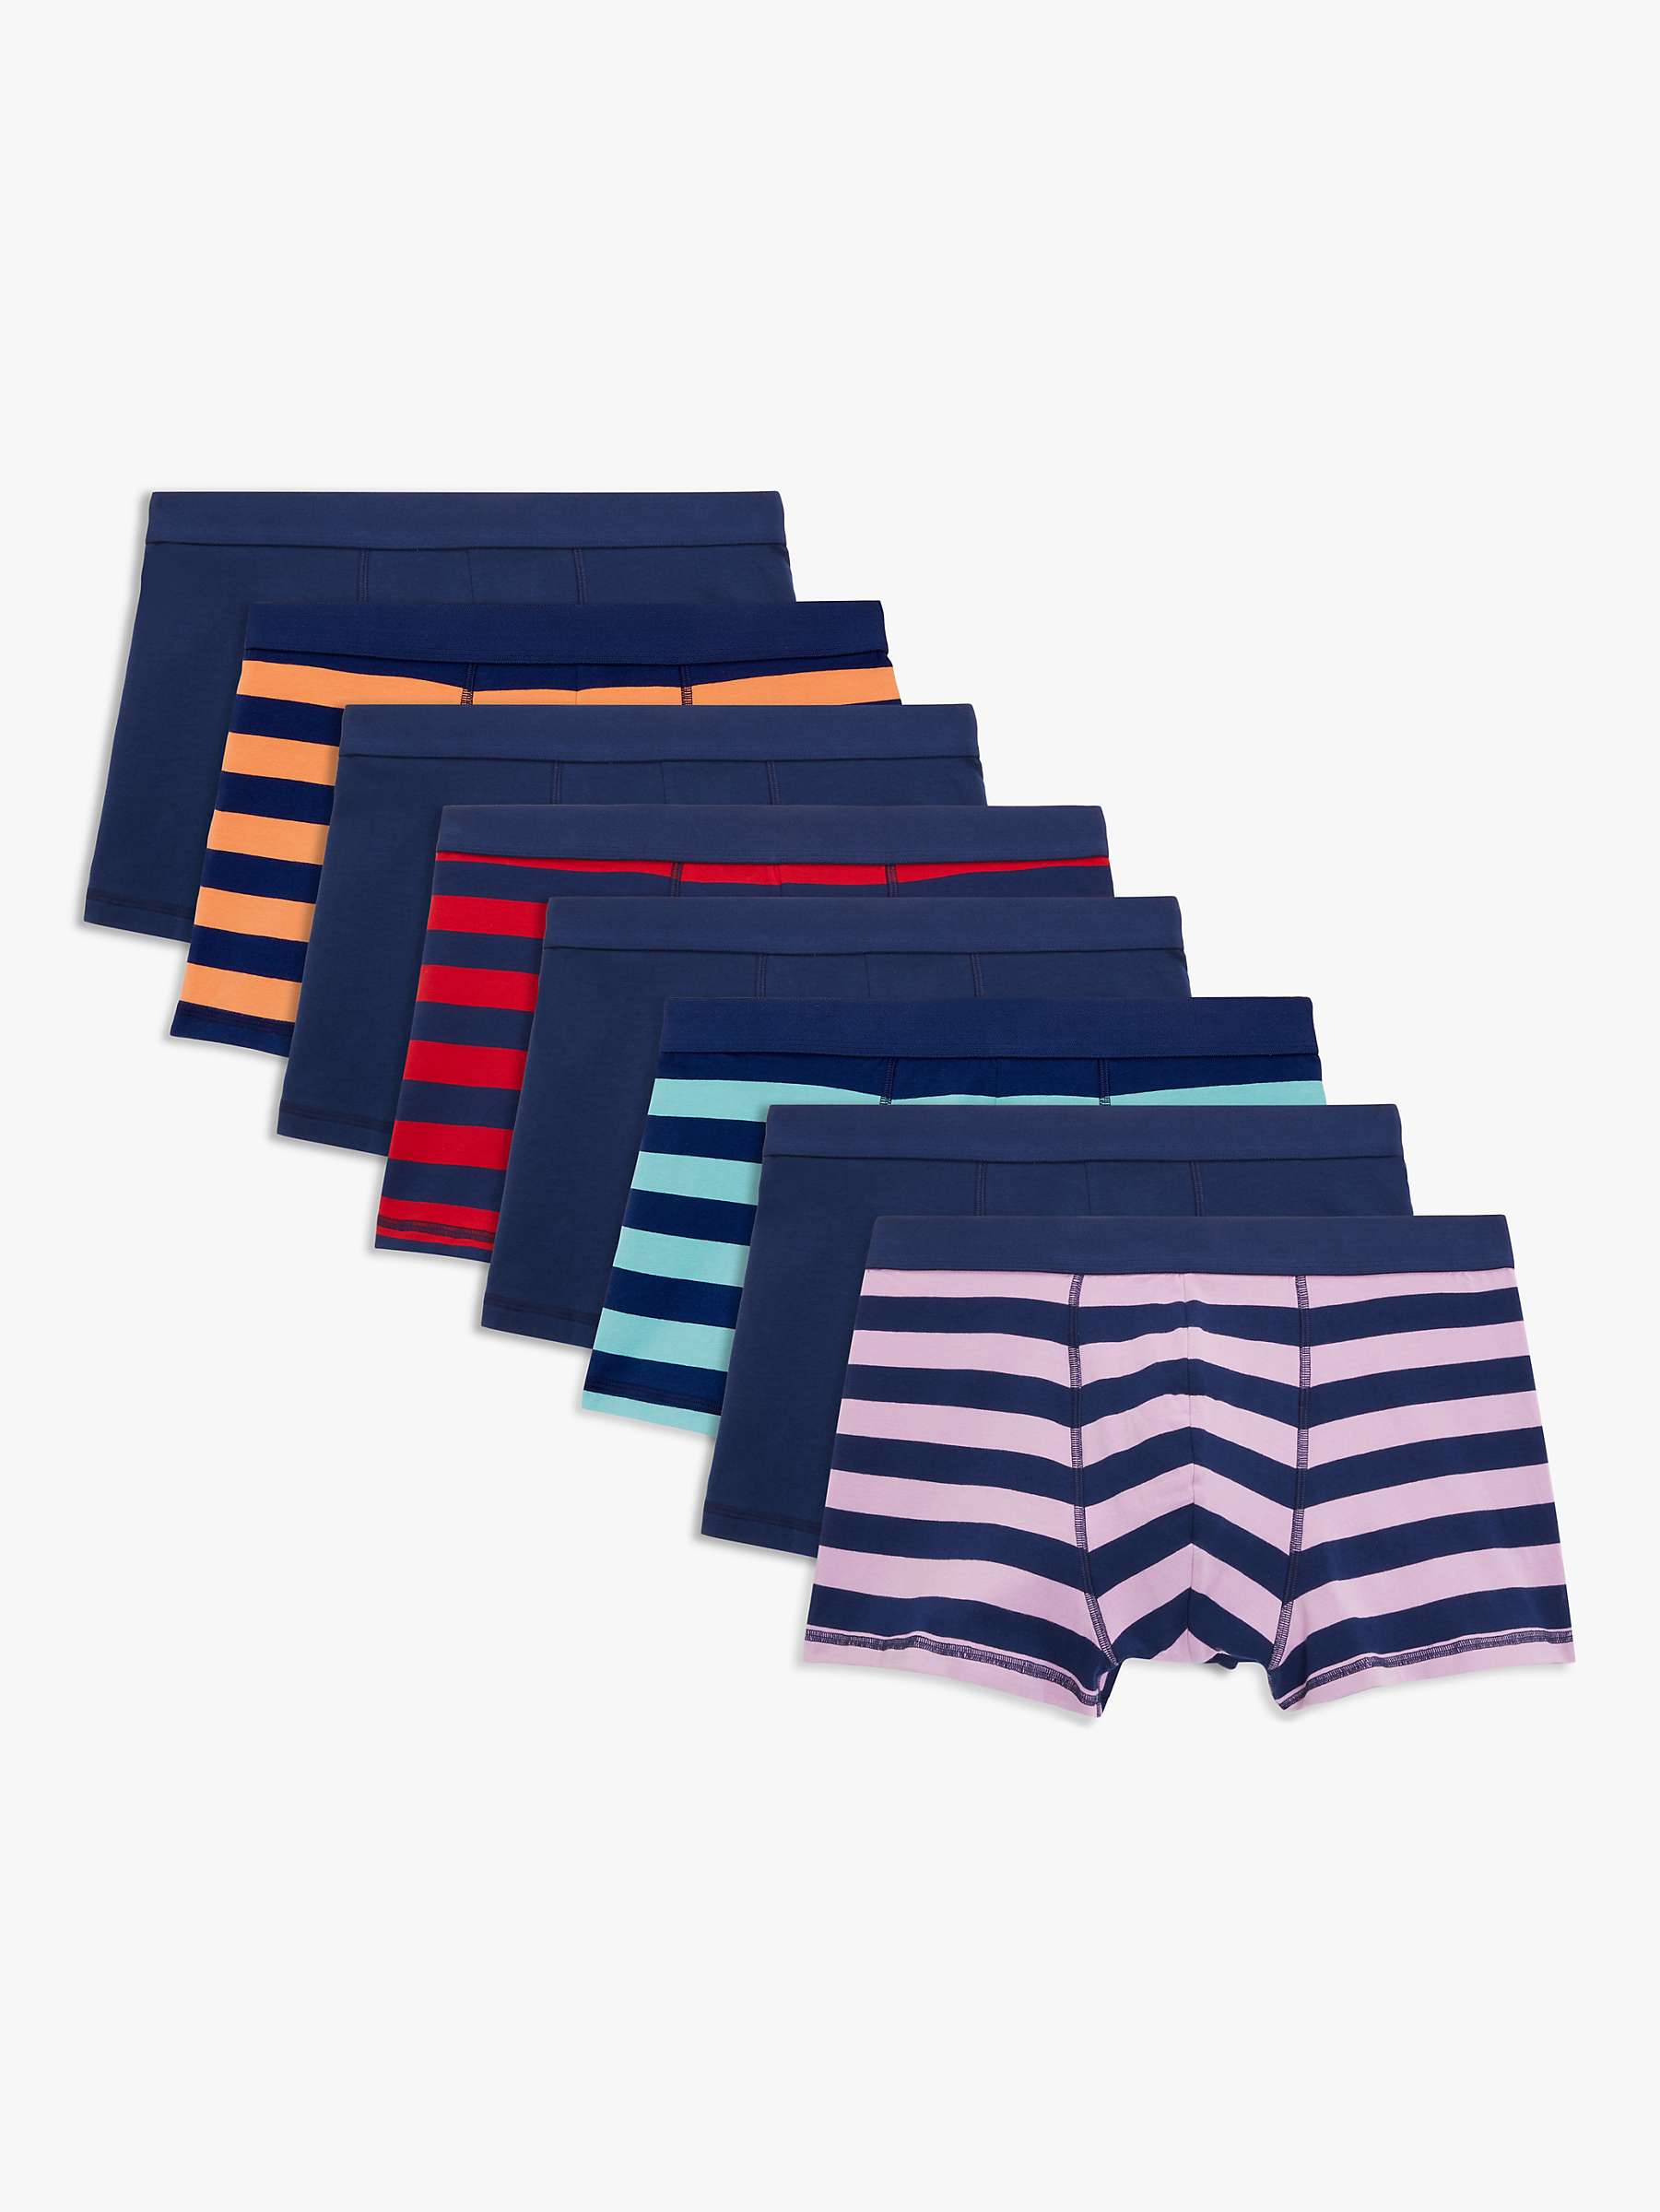 Buy John Lewis ANYDAY Stretch Cotton Stripe Plain Trunks, Pack of 8, Navy Blue/Multi Online at johnlewis.com